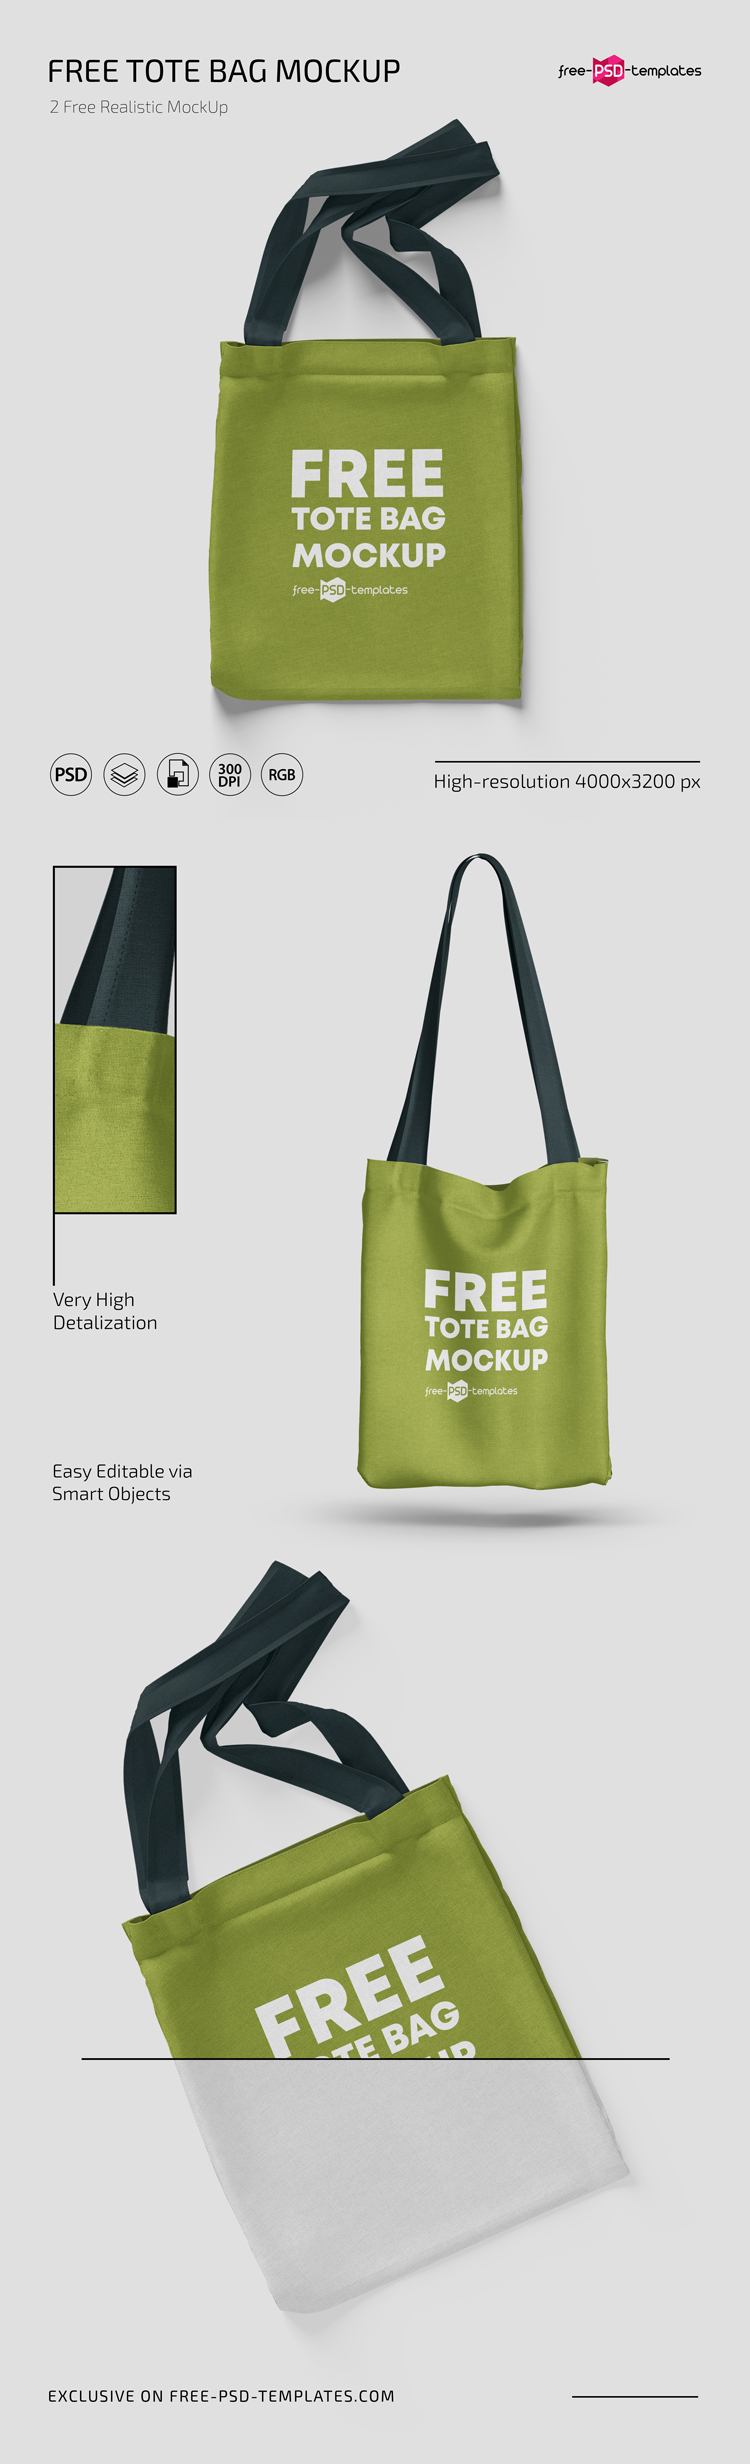 Download Free Tote Bag Mockups in PSD | Free PSD Templates